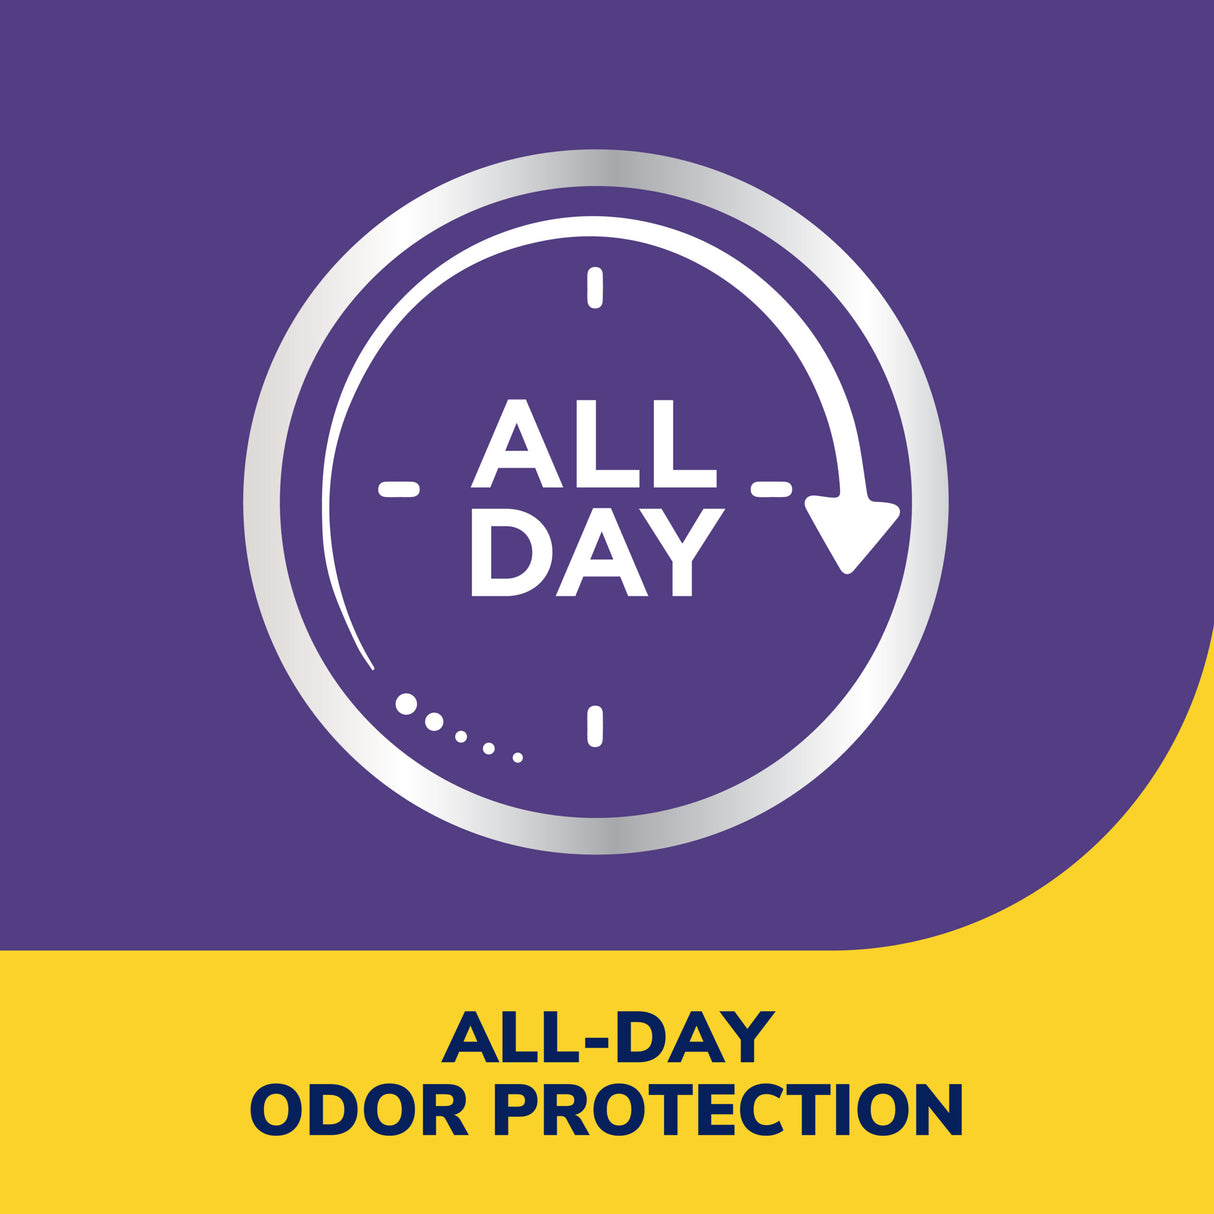 image of all day odor protection